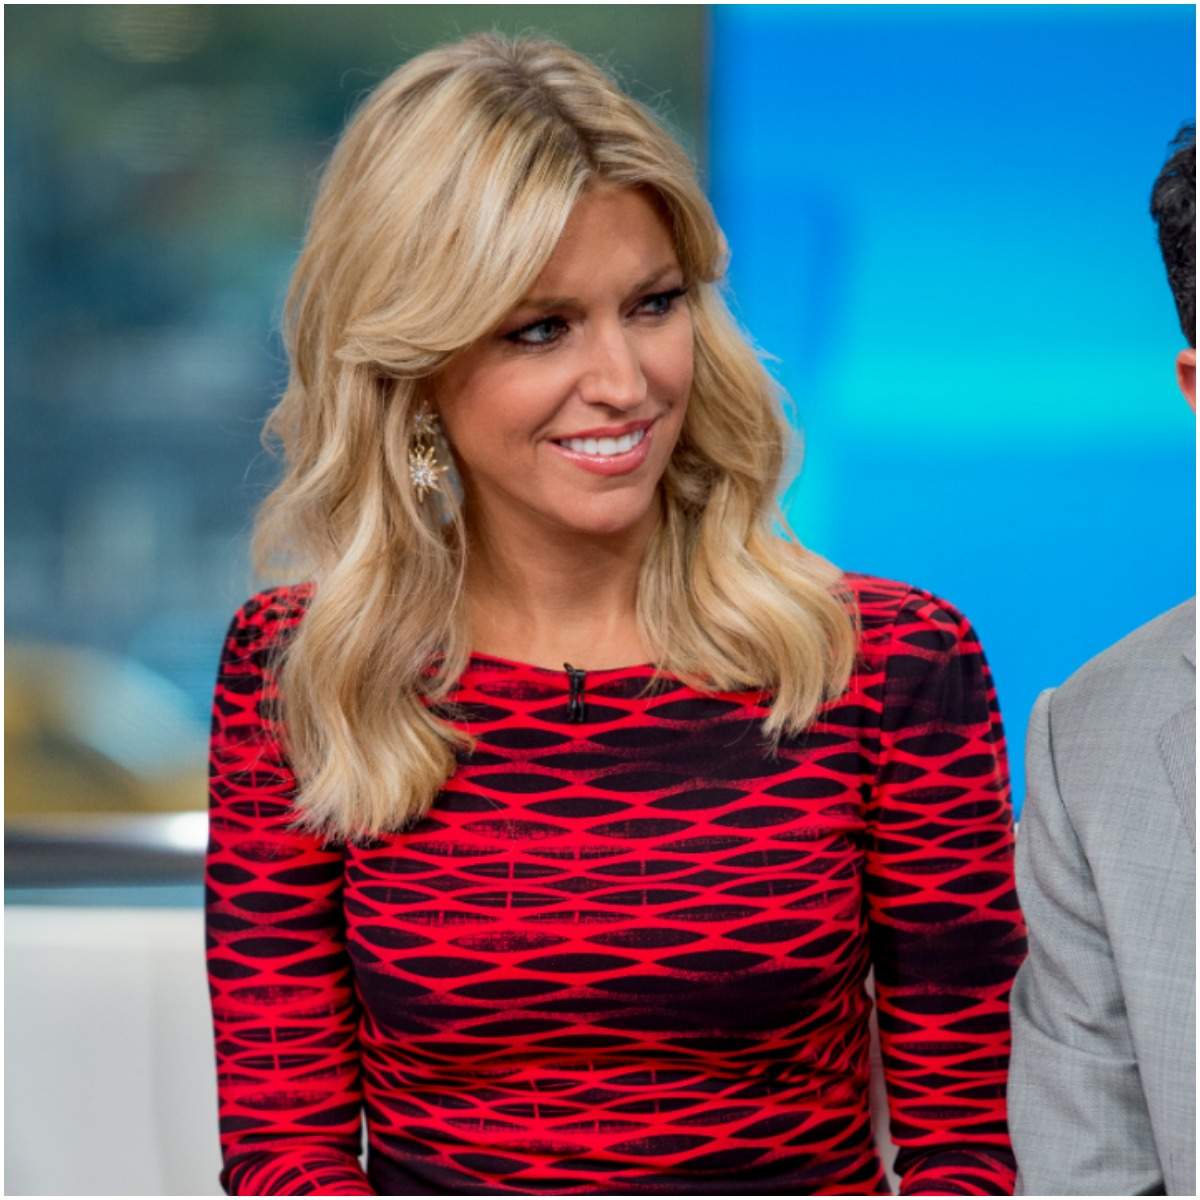 ainsley earhardt related to dale earnhardt